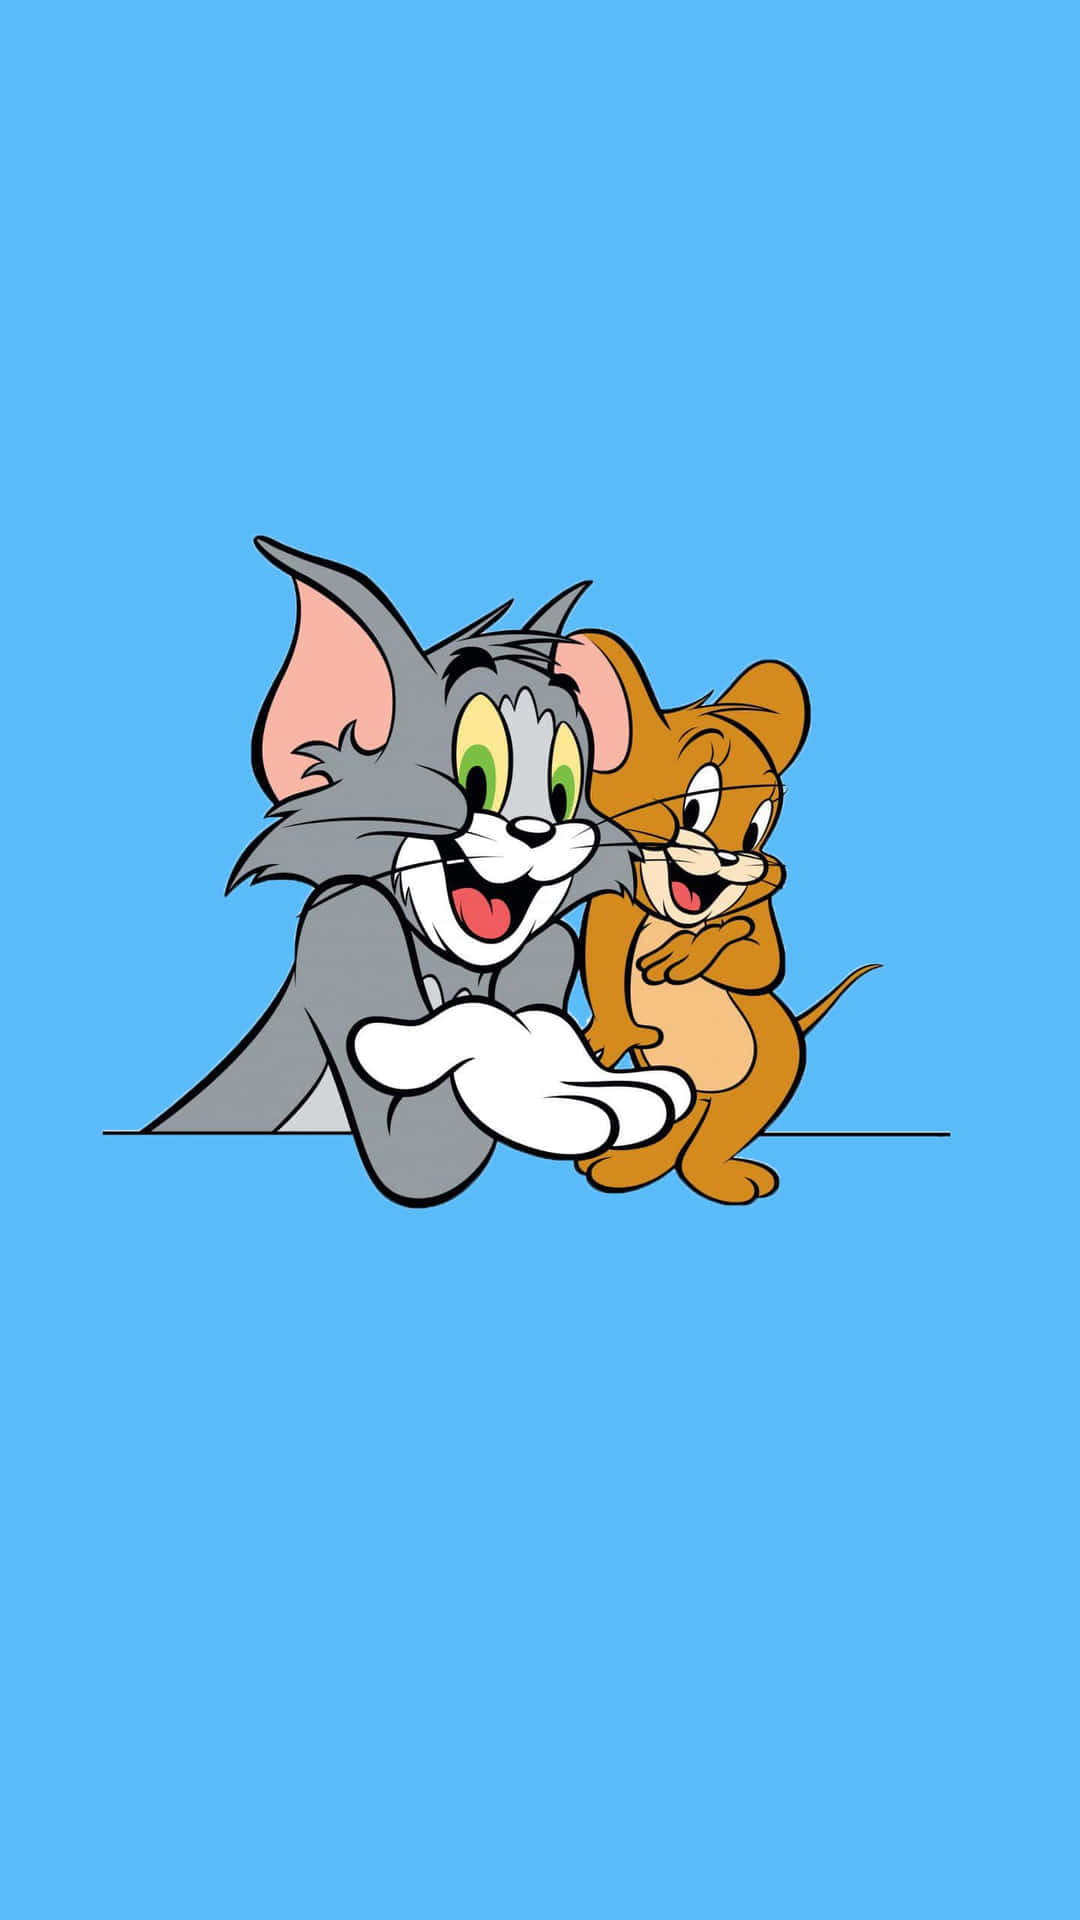 Tom And Jerry chase each other in an endless game of pursuit